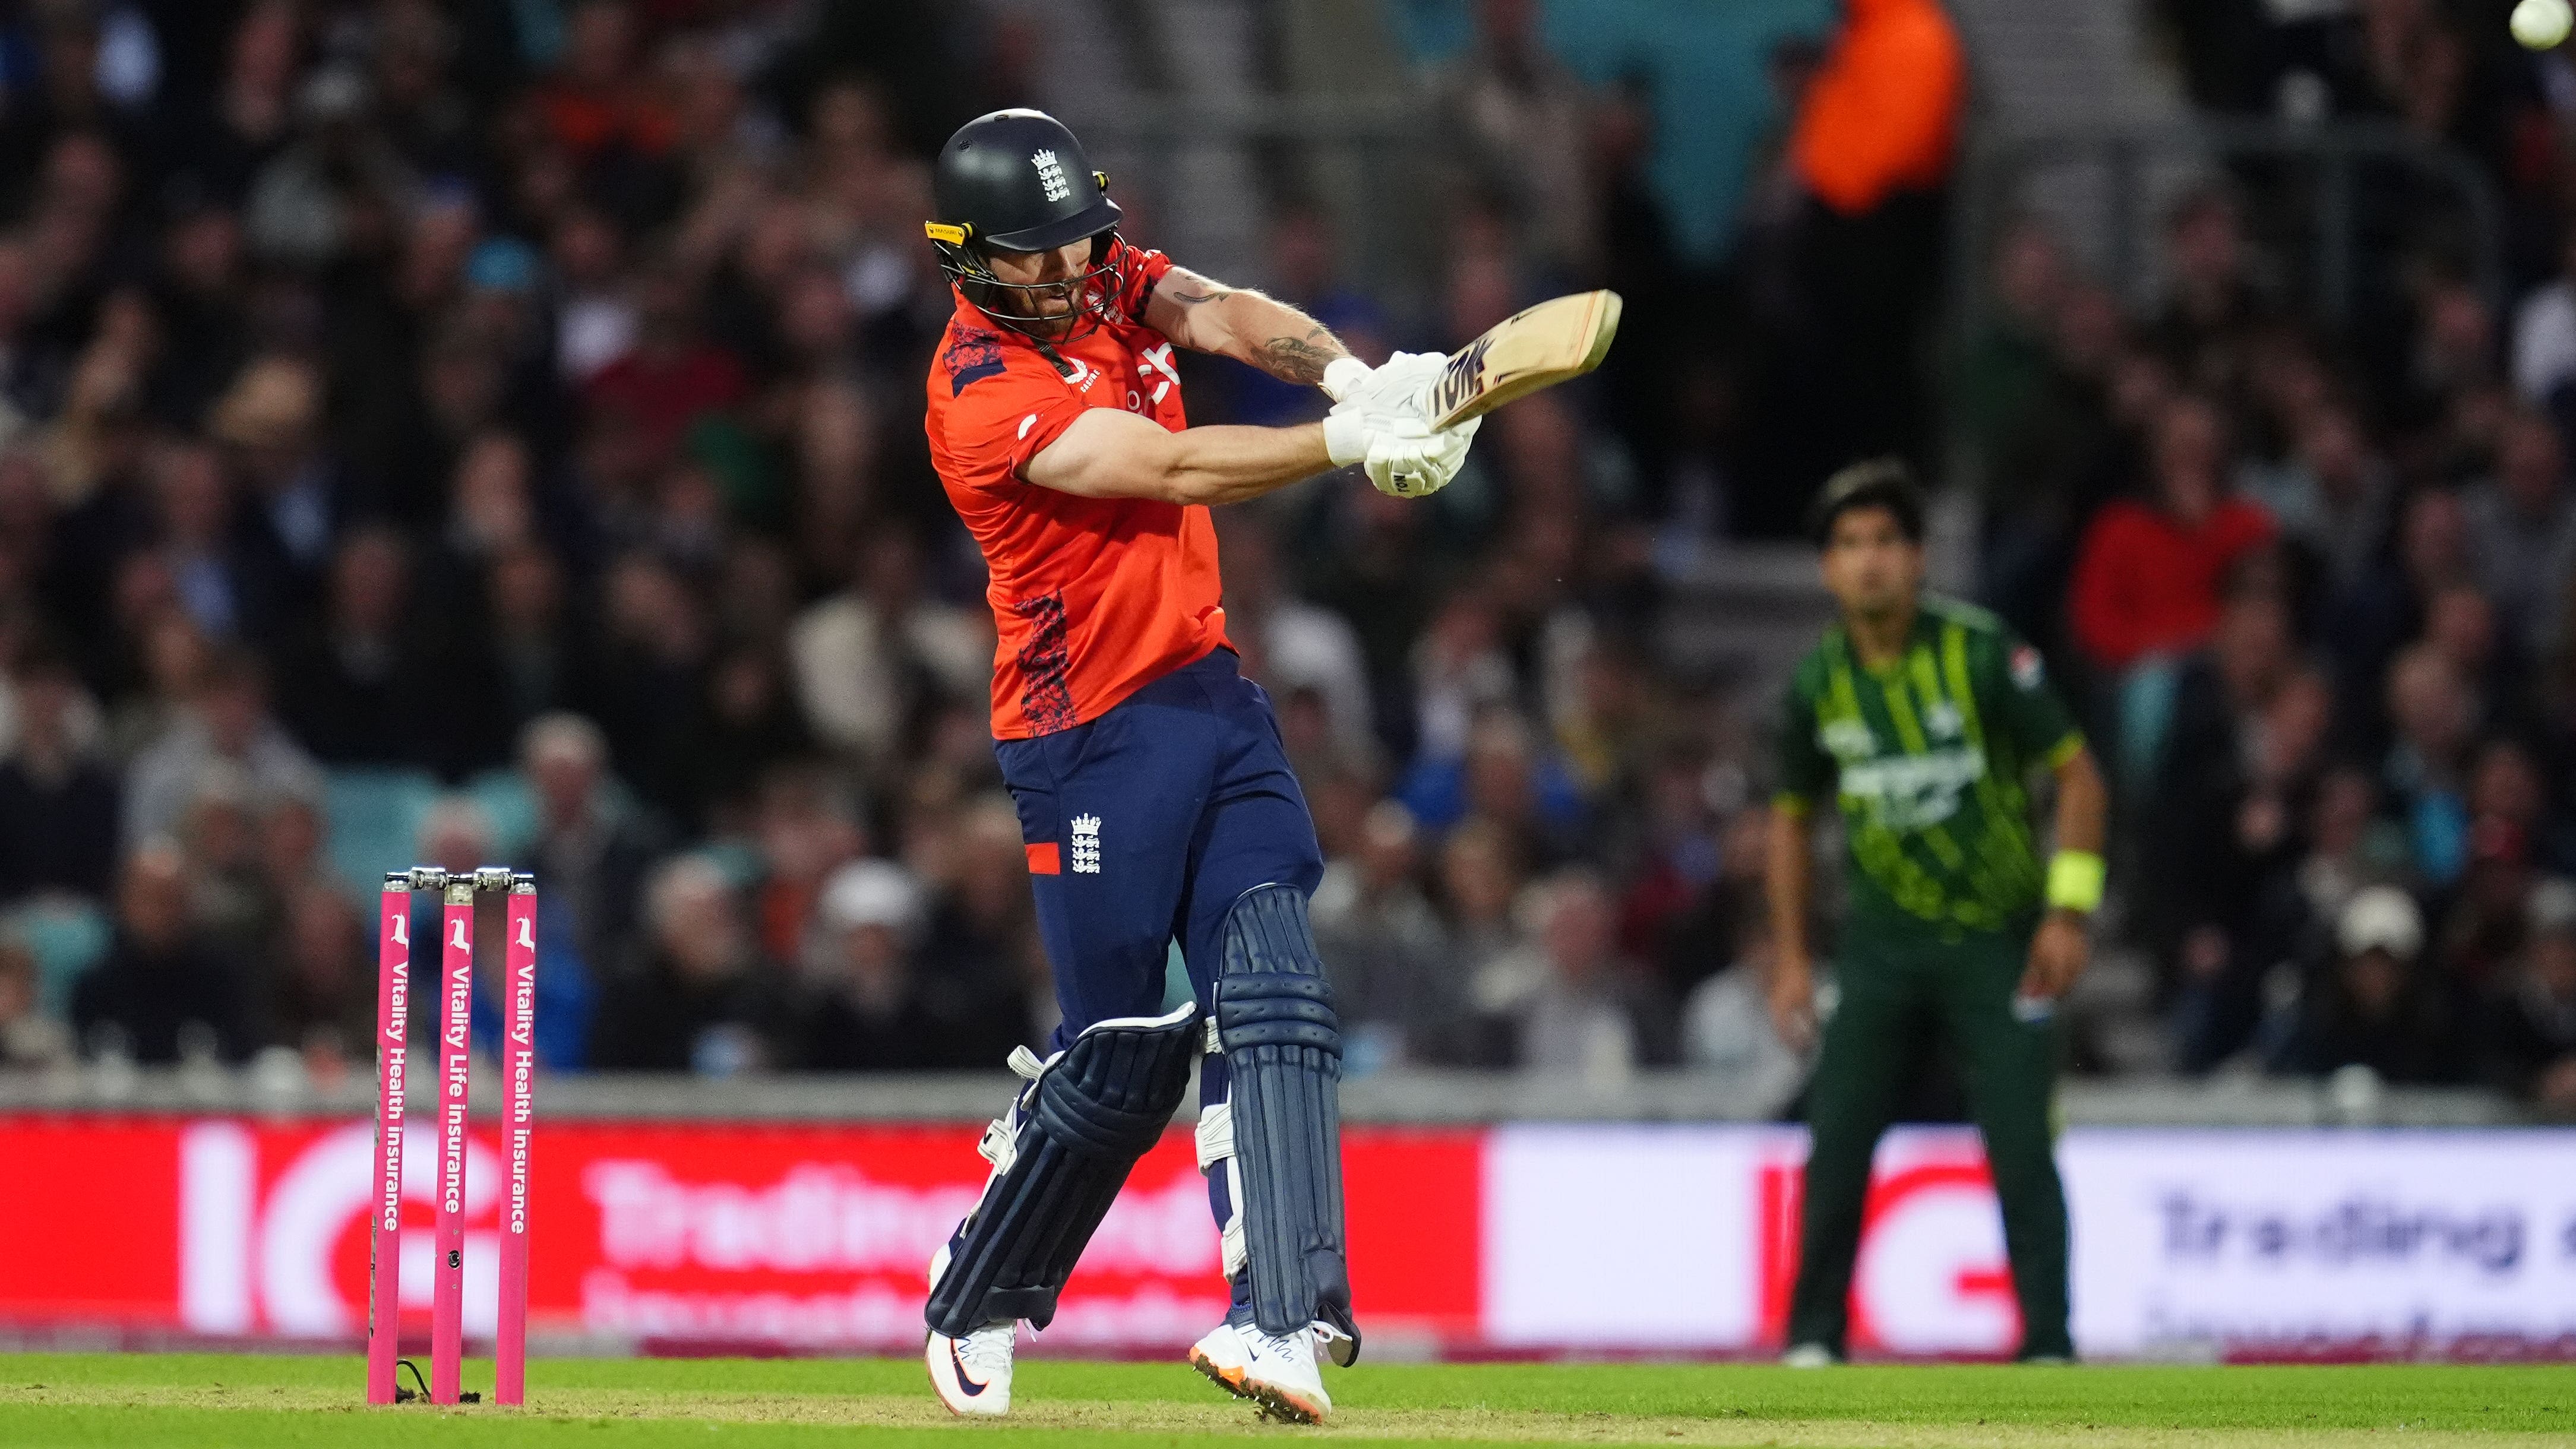 Phil Salt stars with the bat as England wrap up T20 series win over Pakistan